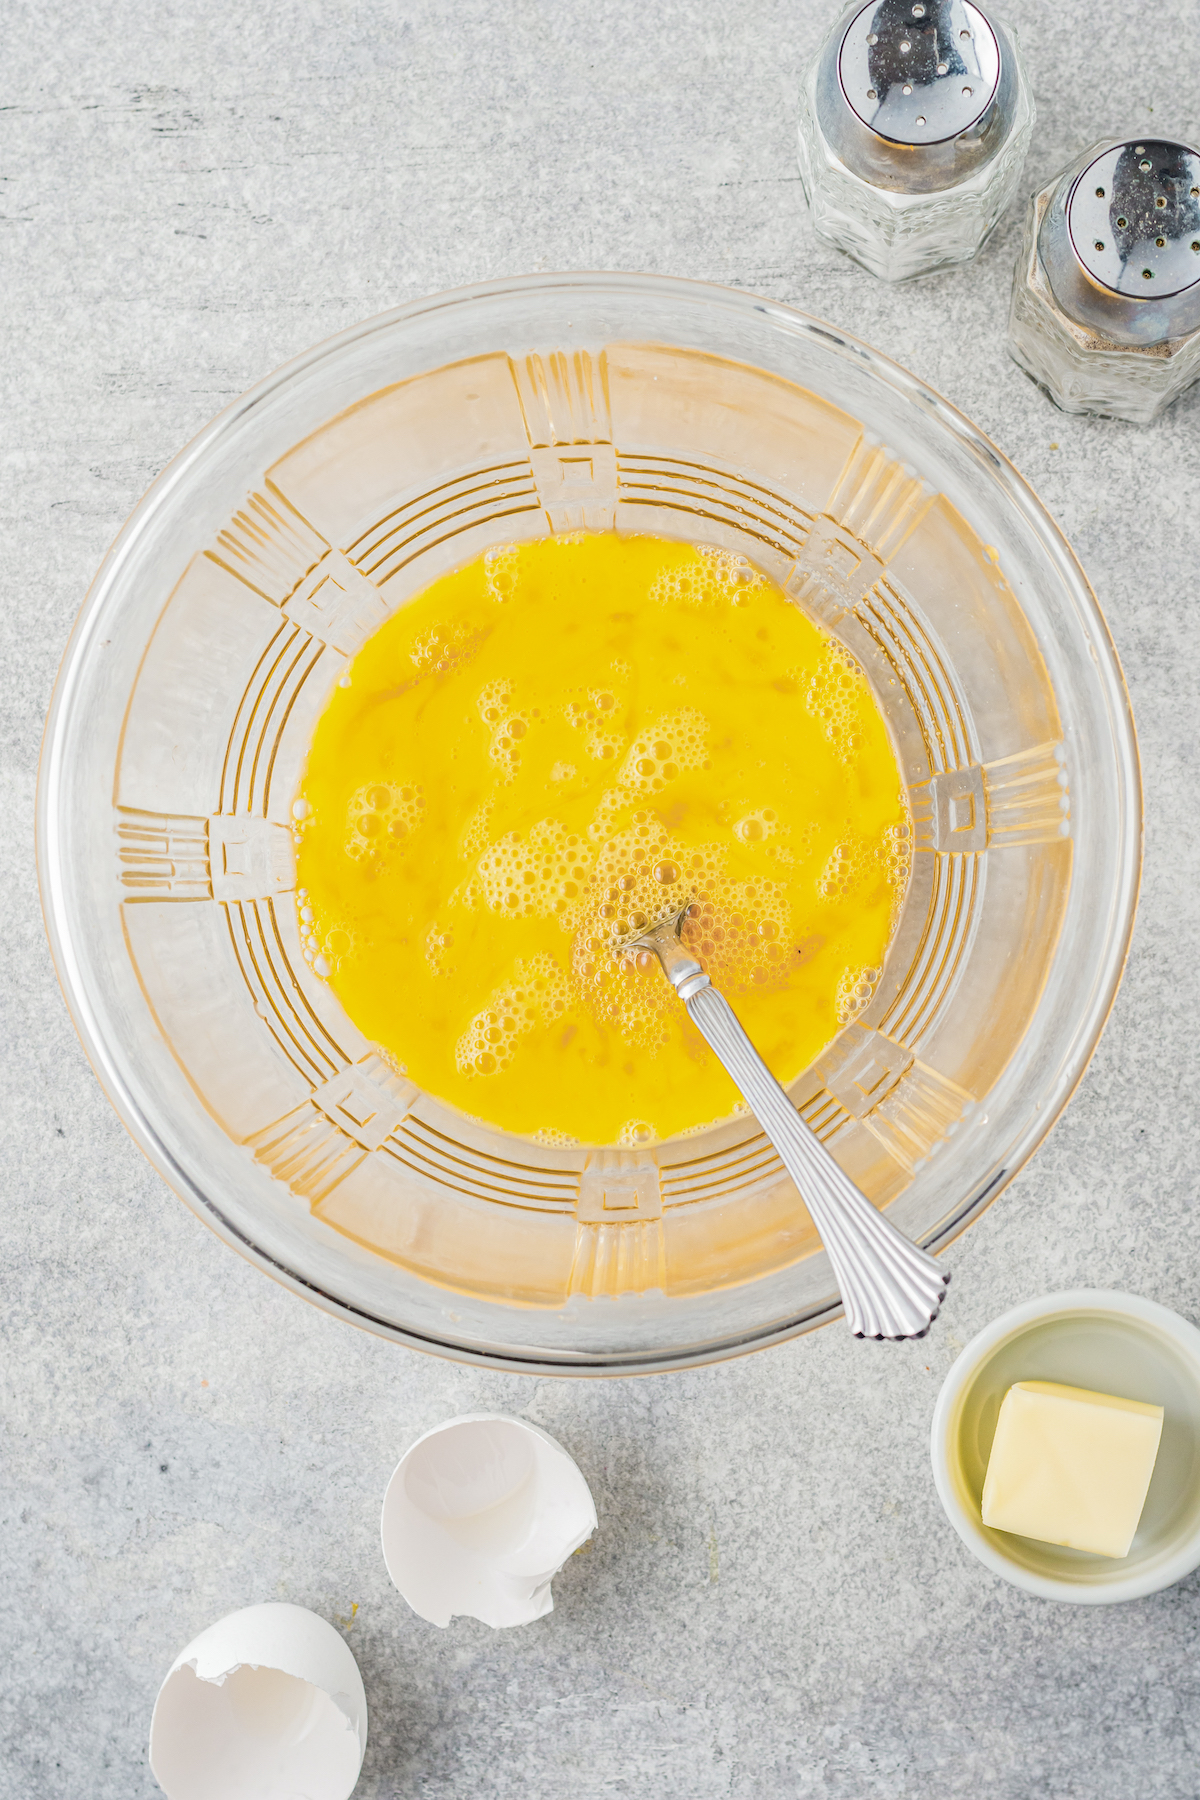 Eggs whisked together with seasoning in a glass mixing bowl.